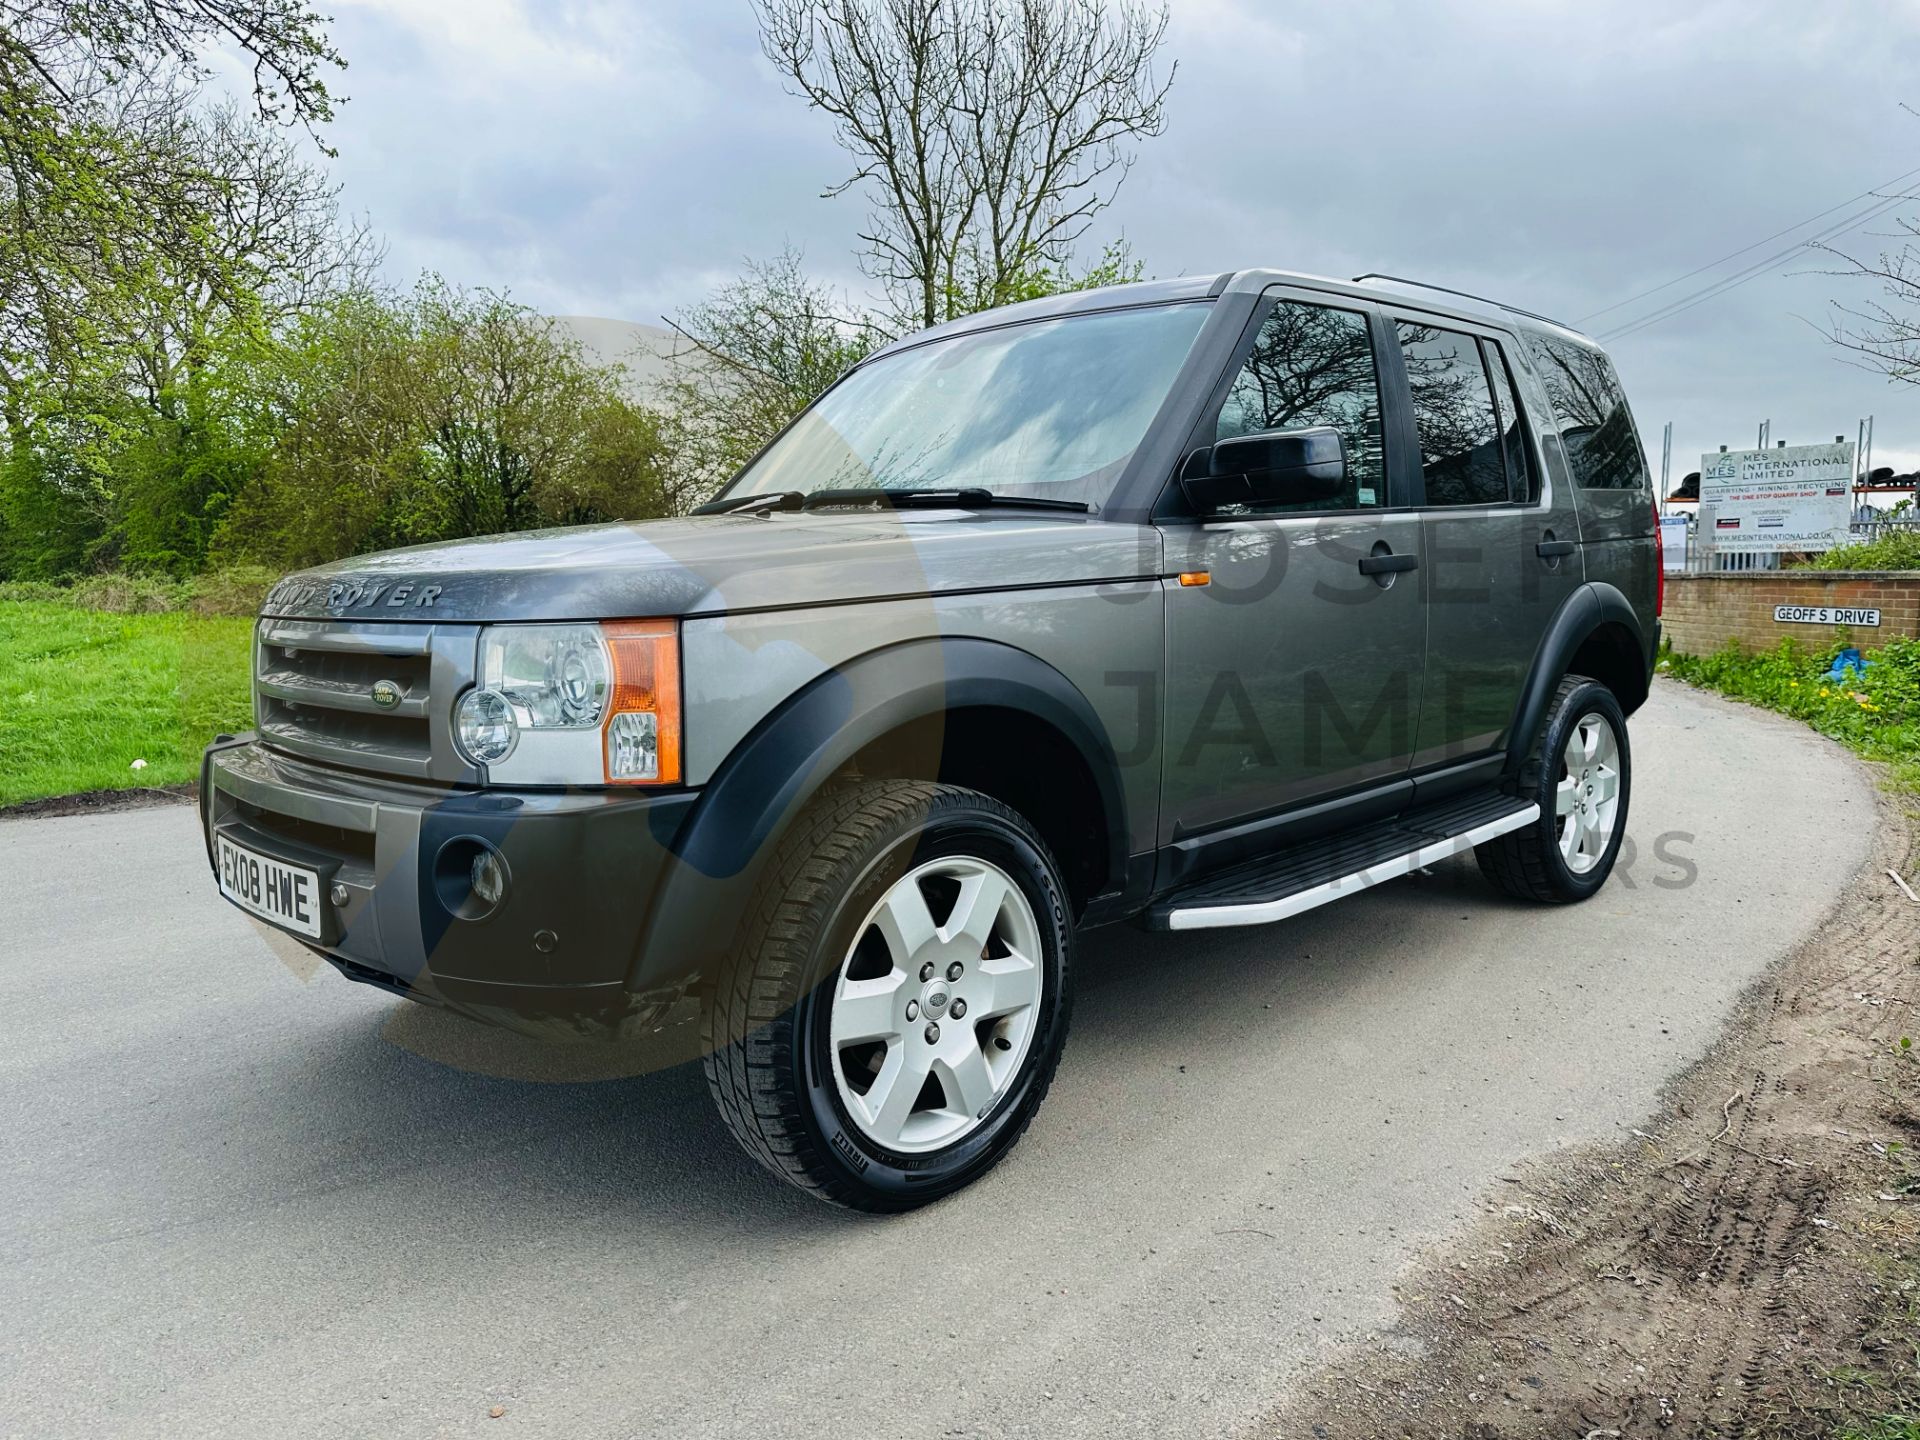 (ON SALE) LAND ROVER DISCOVERY TDV6 *HSE EDITION* AUTO (08 REG) 7 SEATER - 12X SERVICES (NO VAT) - Image 5 of 51